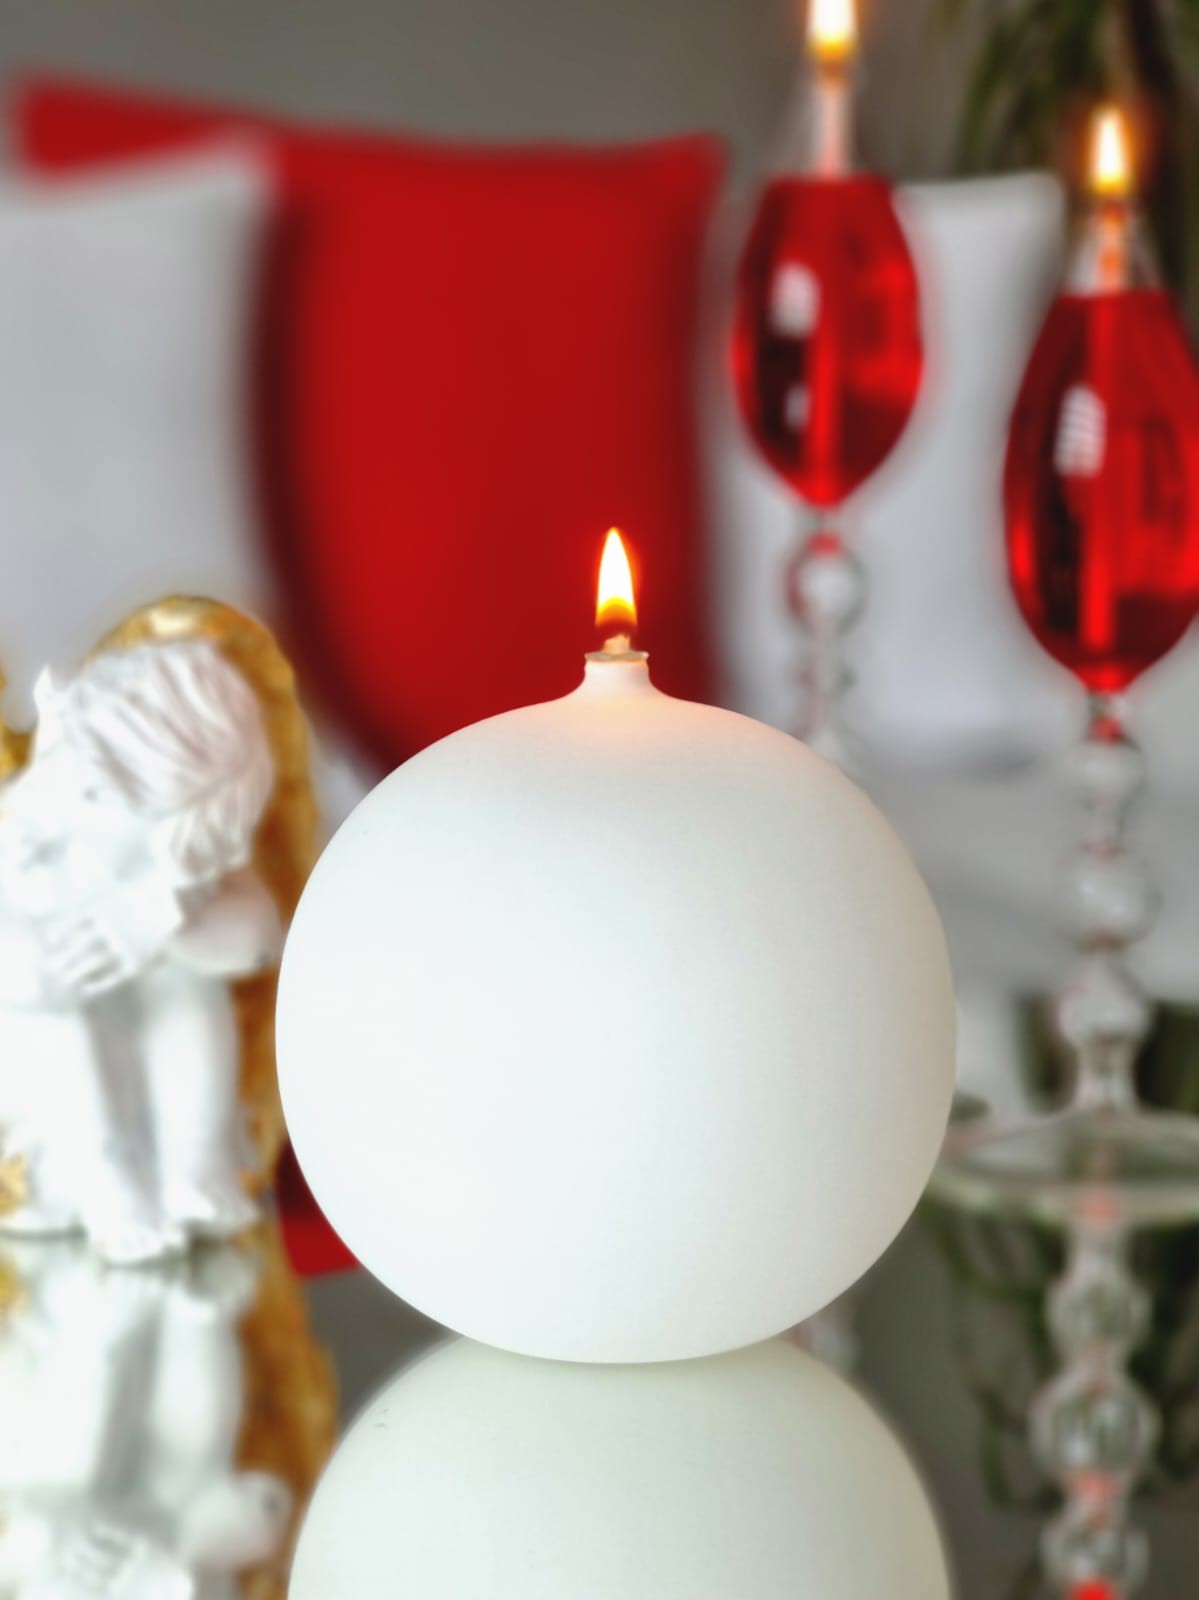 Quem White Handmade Balloon Glass Oil Candle , Modern Home and Office Decor, Decorative White Ball Oil Lamp